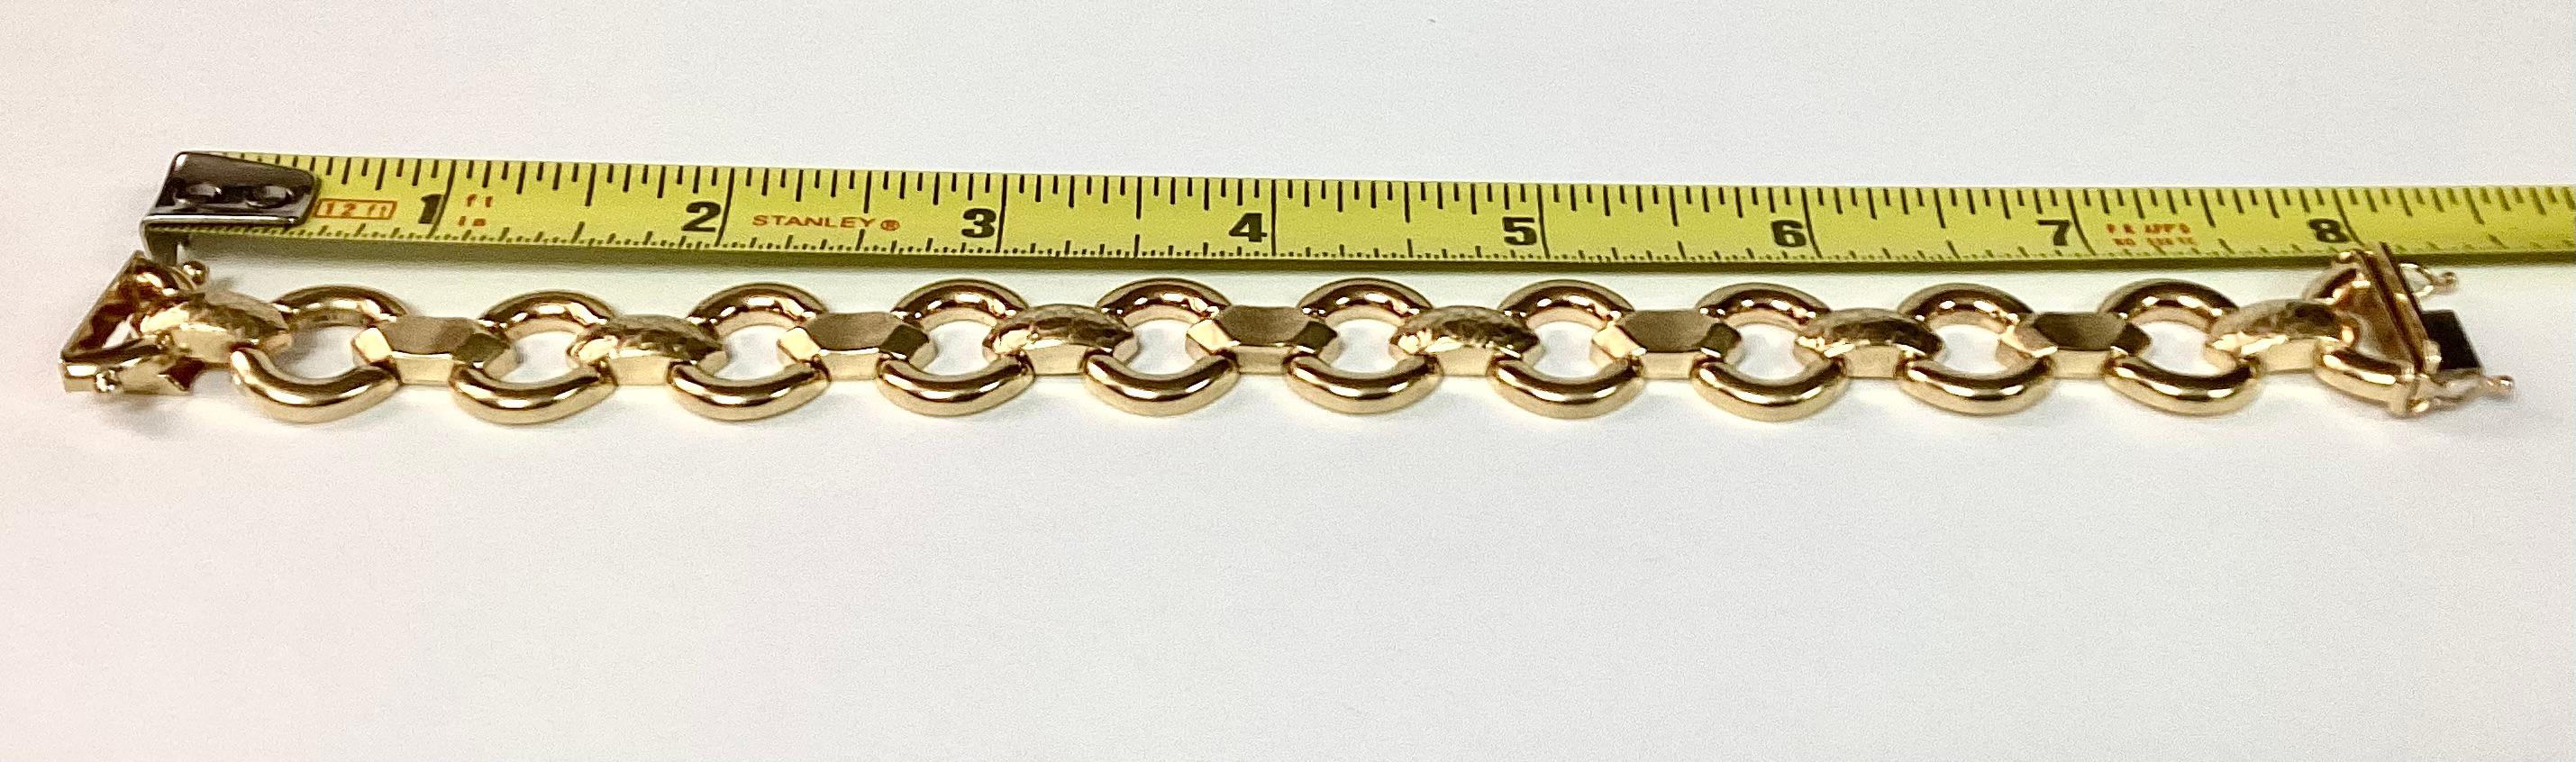 14k yellow gold link bracelet. Open box secure clasp with double safety latch.